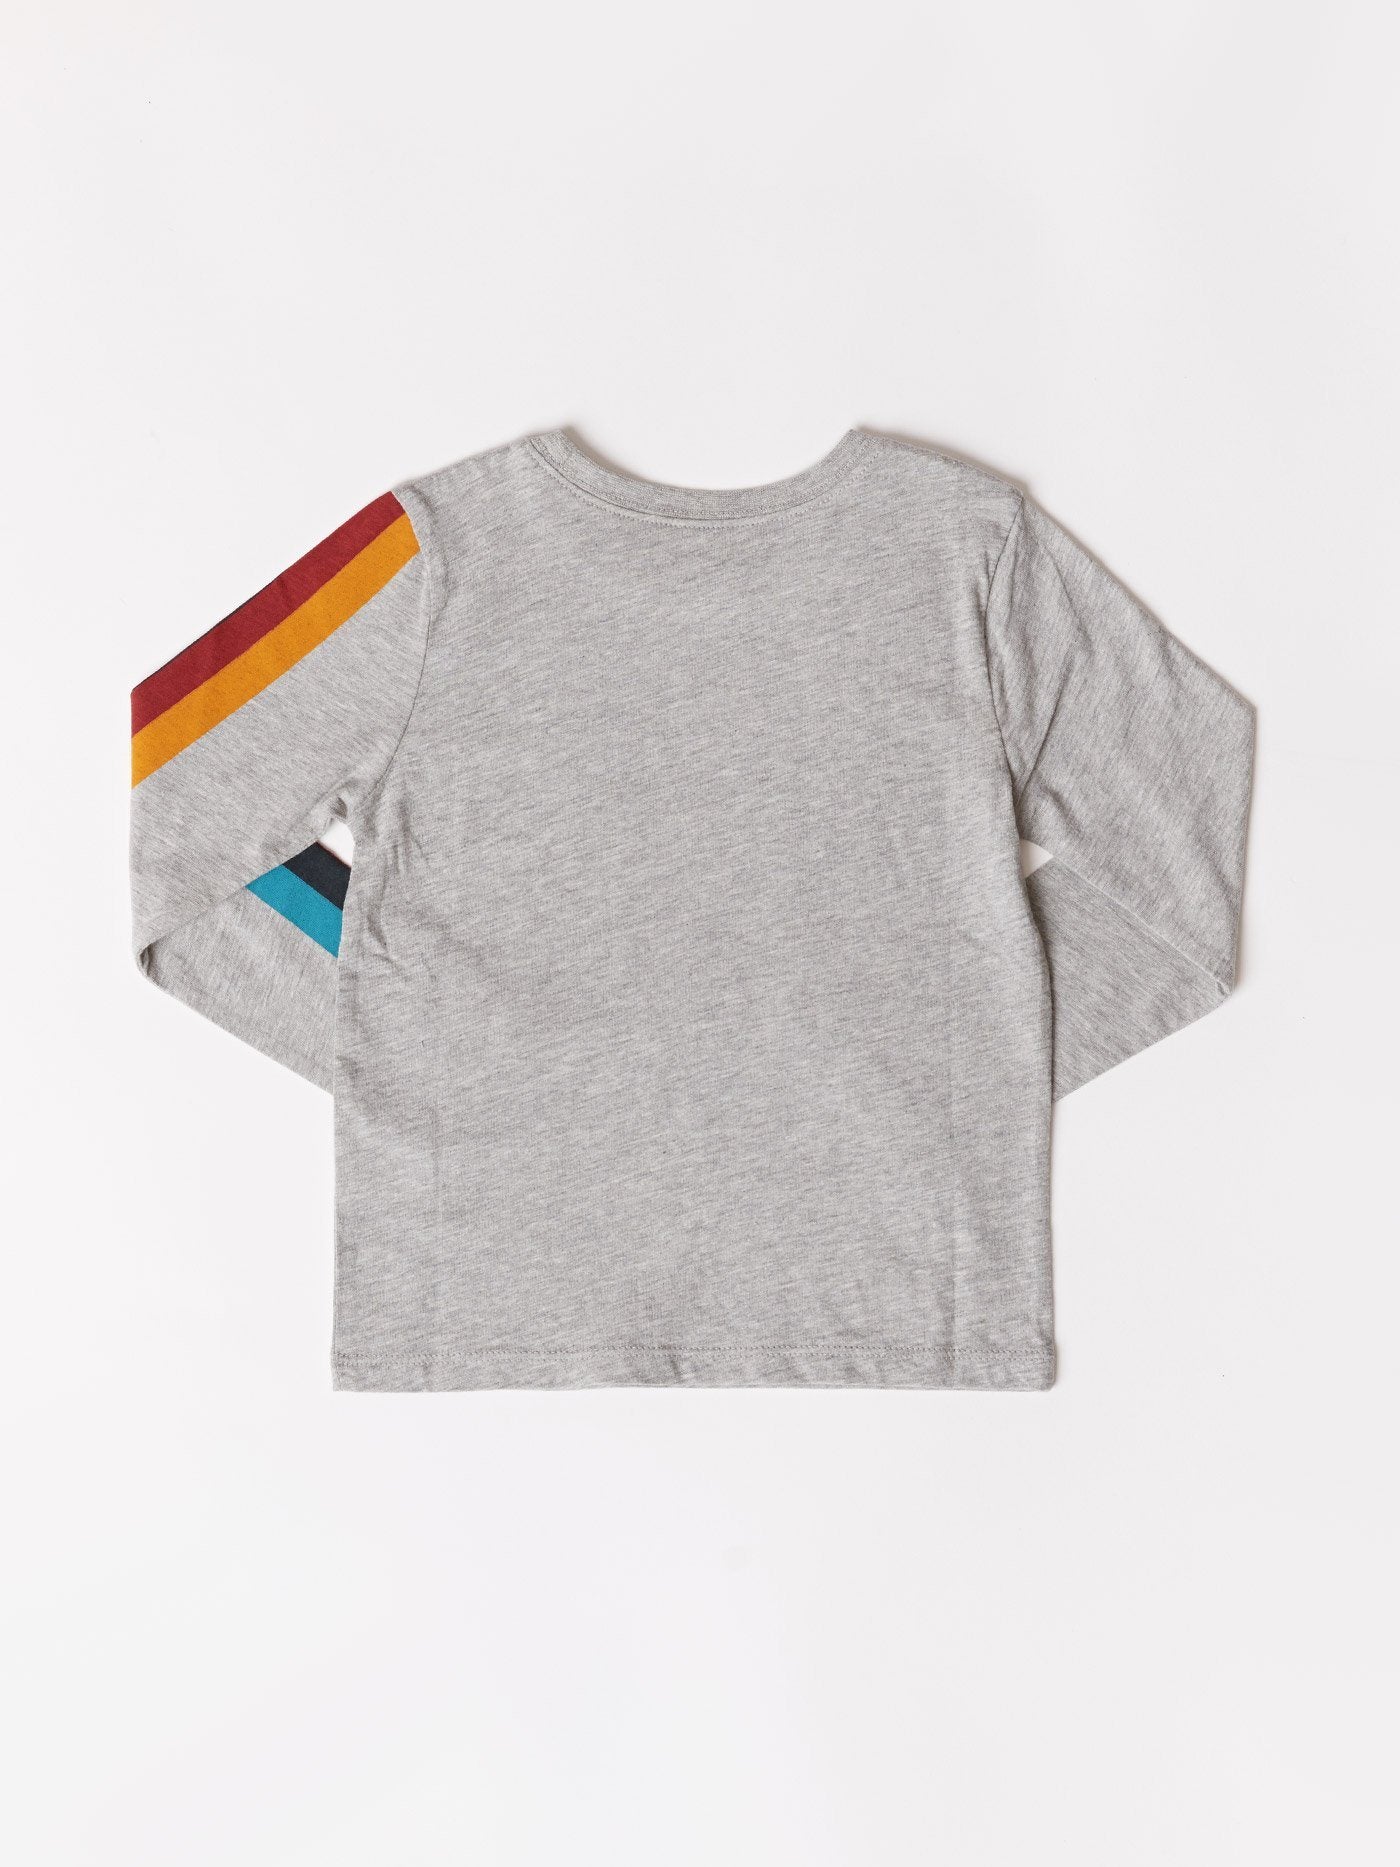 Toddler Stripe Graphic Ls Tee Boys Tops Theo+Leigh 